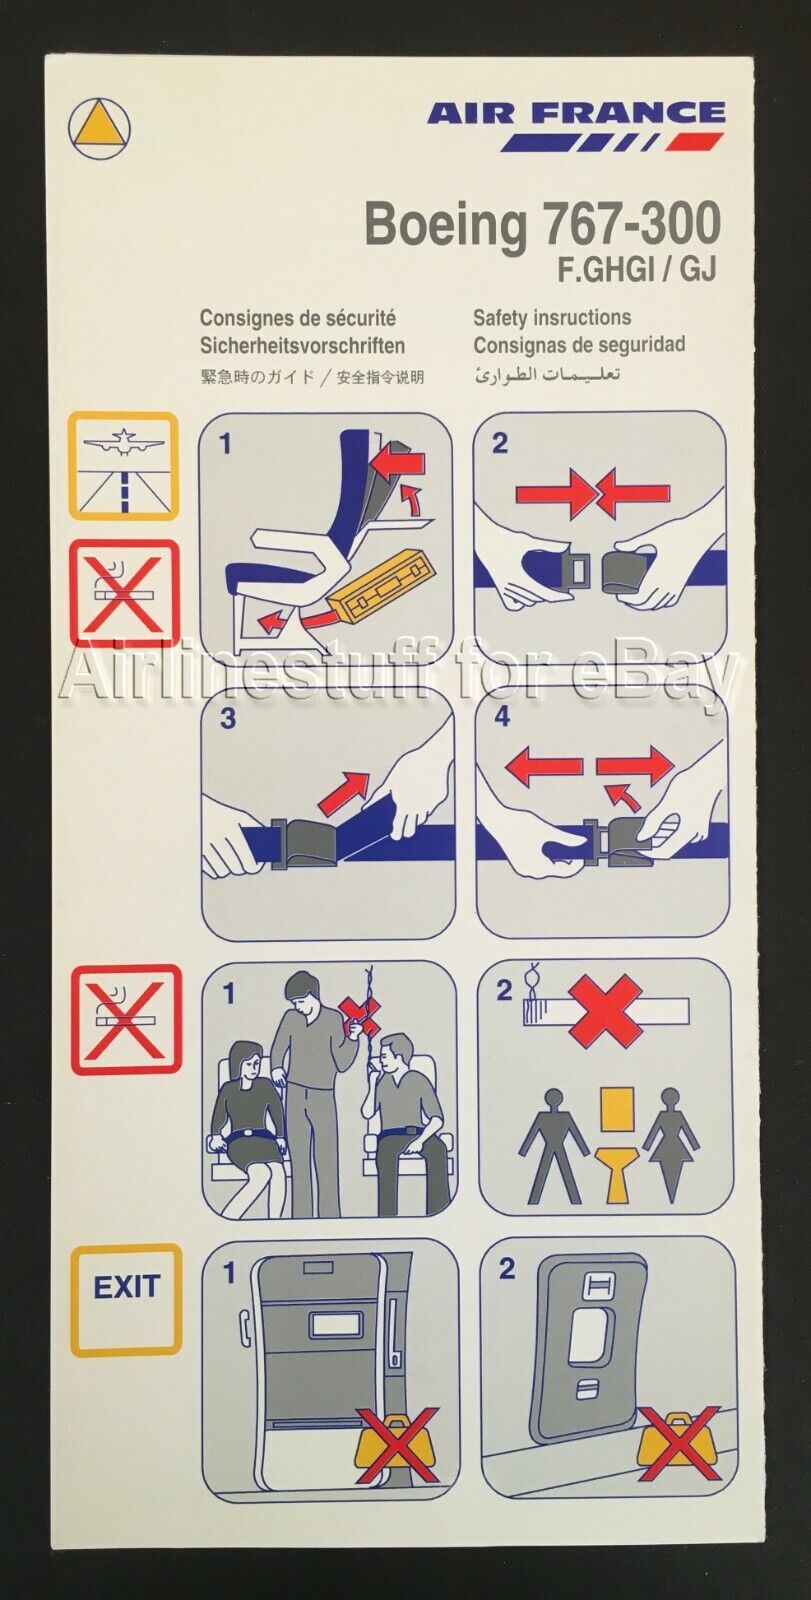 1999 AIR FRANCE Boeing 767-300 SAFETY CARD airways airlines REGN F-GHGI / F-GHGJ